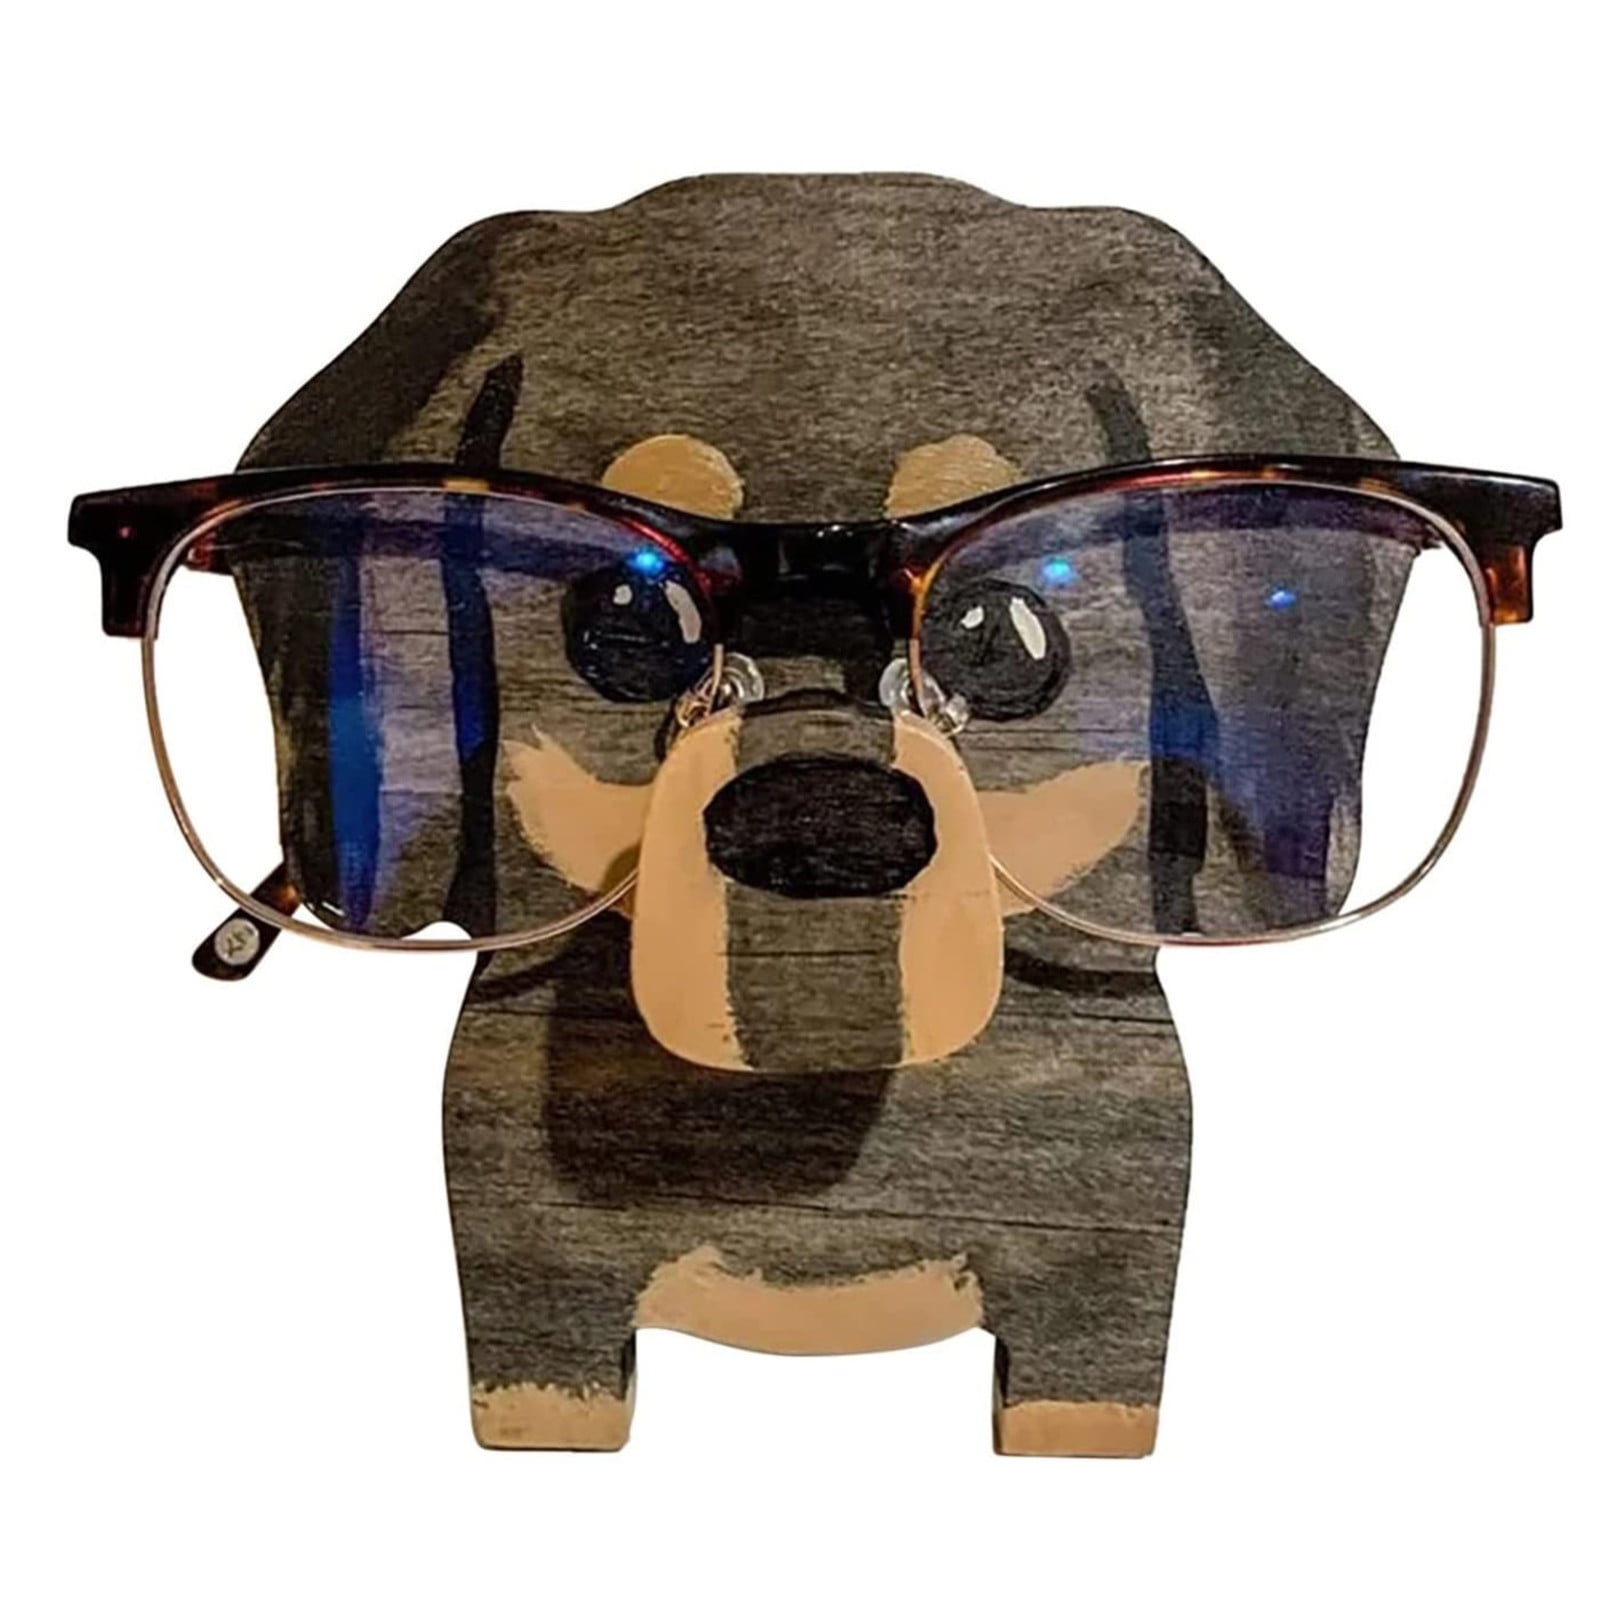  Artistic(TM) - Handmade Wooden Spectacle Holder Eyeglass Holder  Dog Display Stand for Home Office Desk Decor Accessories, 7 inches(H), Best  Eyeglass holder you can ever have!! : Home & Kitchen